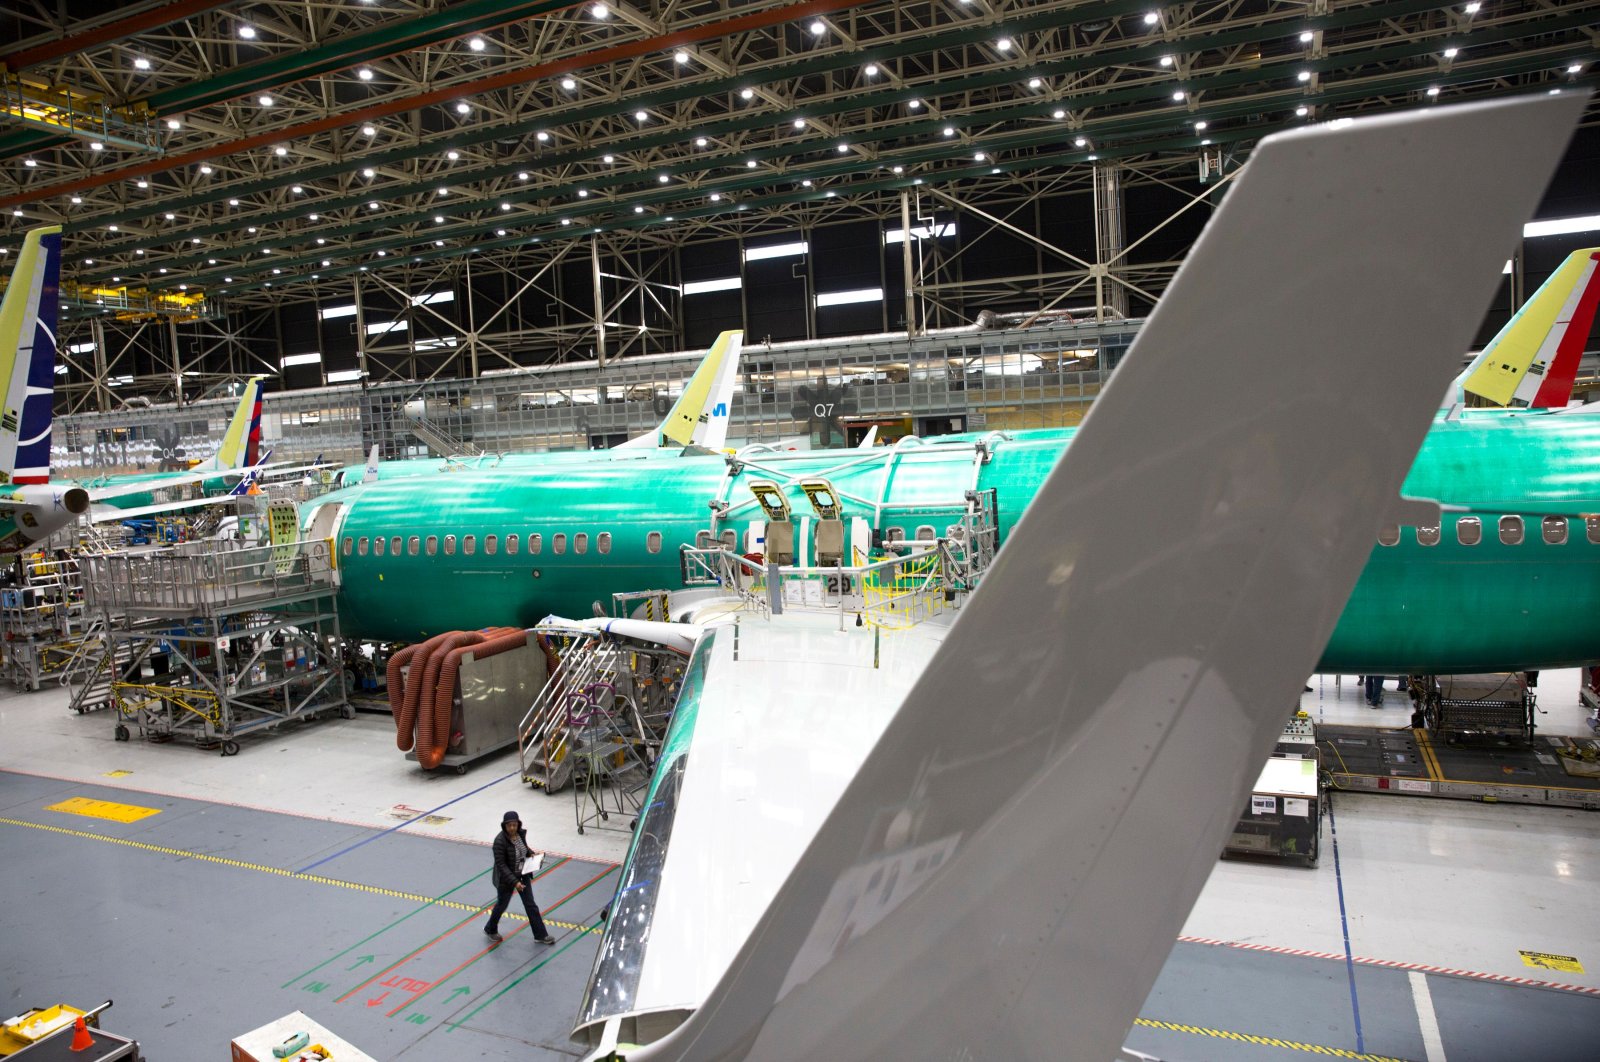 Employees work on Boeing 737 MAX airplanes at the Boeing Renton Factory in Renton, Washington, March 27, 2019. (AFP Photo)